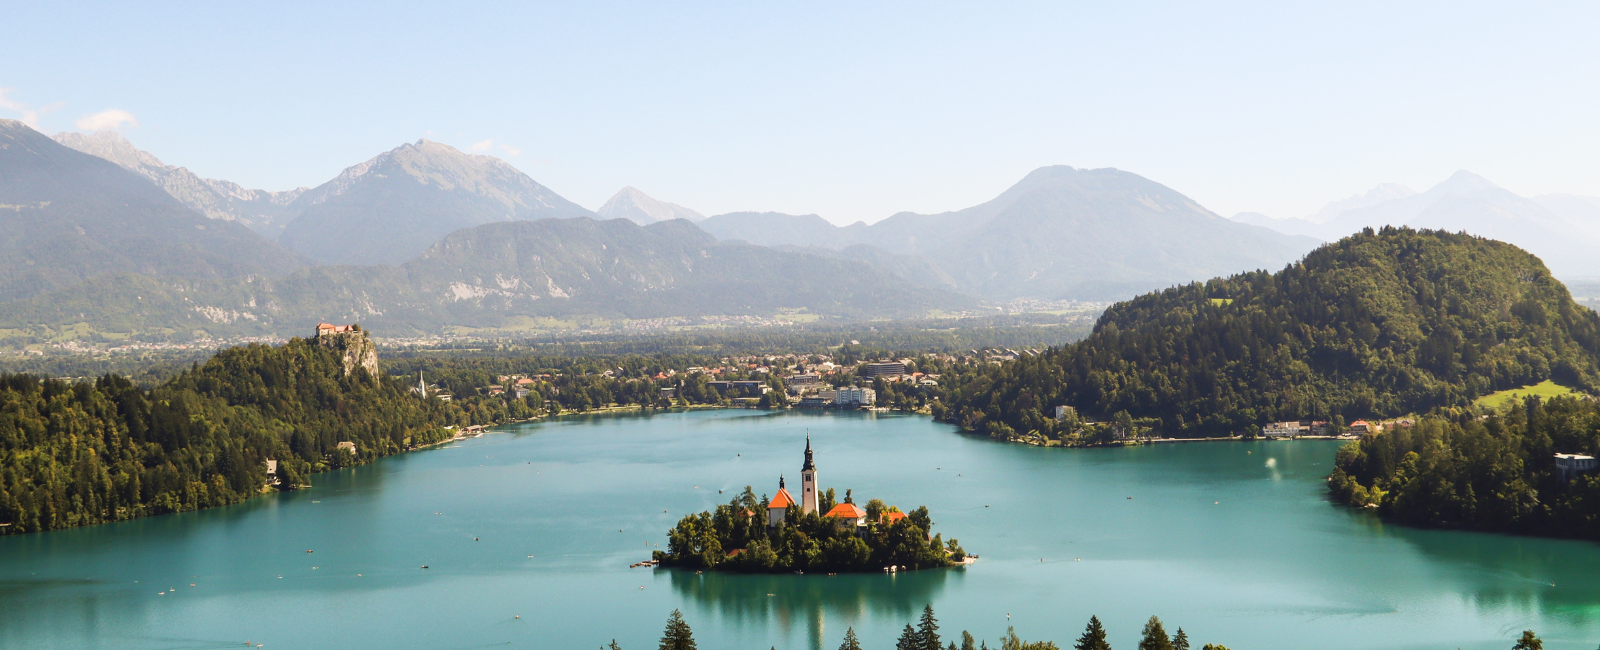 Lake Bled by Greenvalley Pictures via unsplash